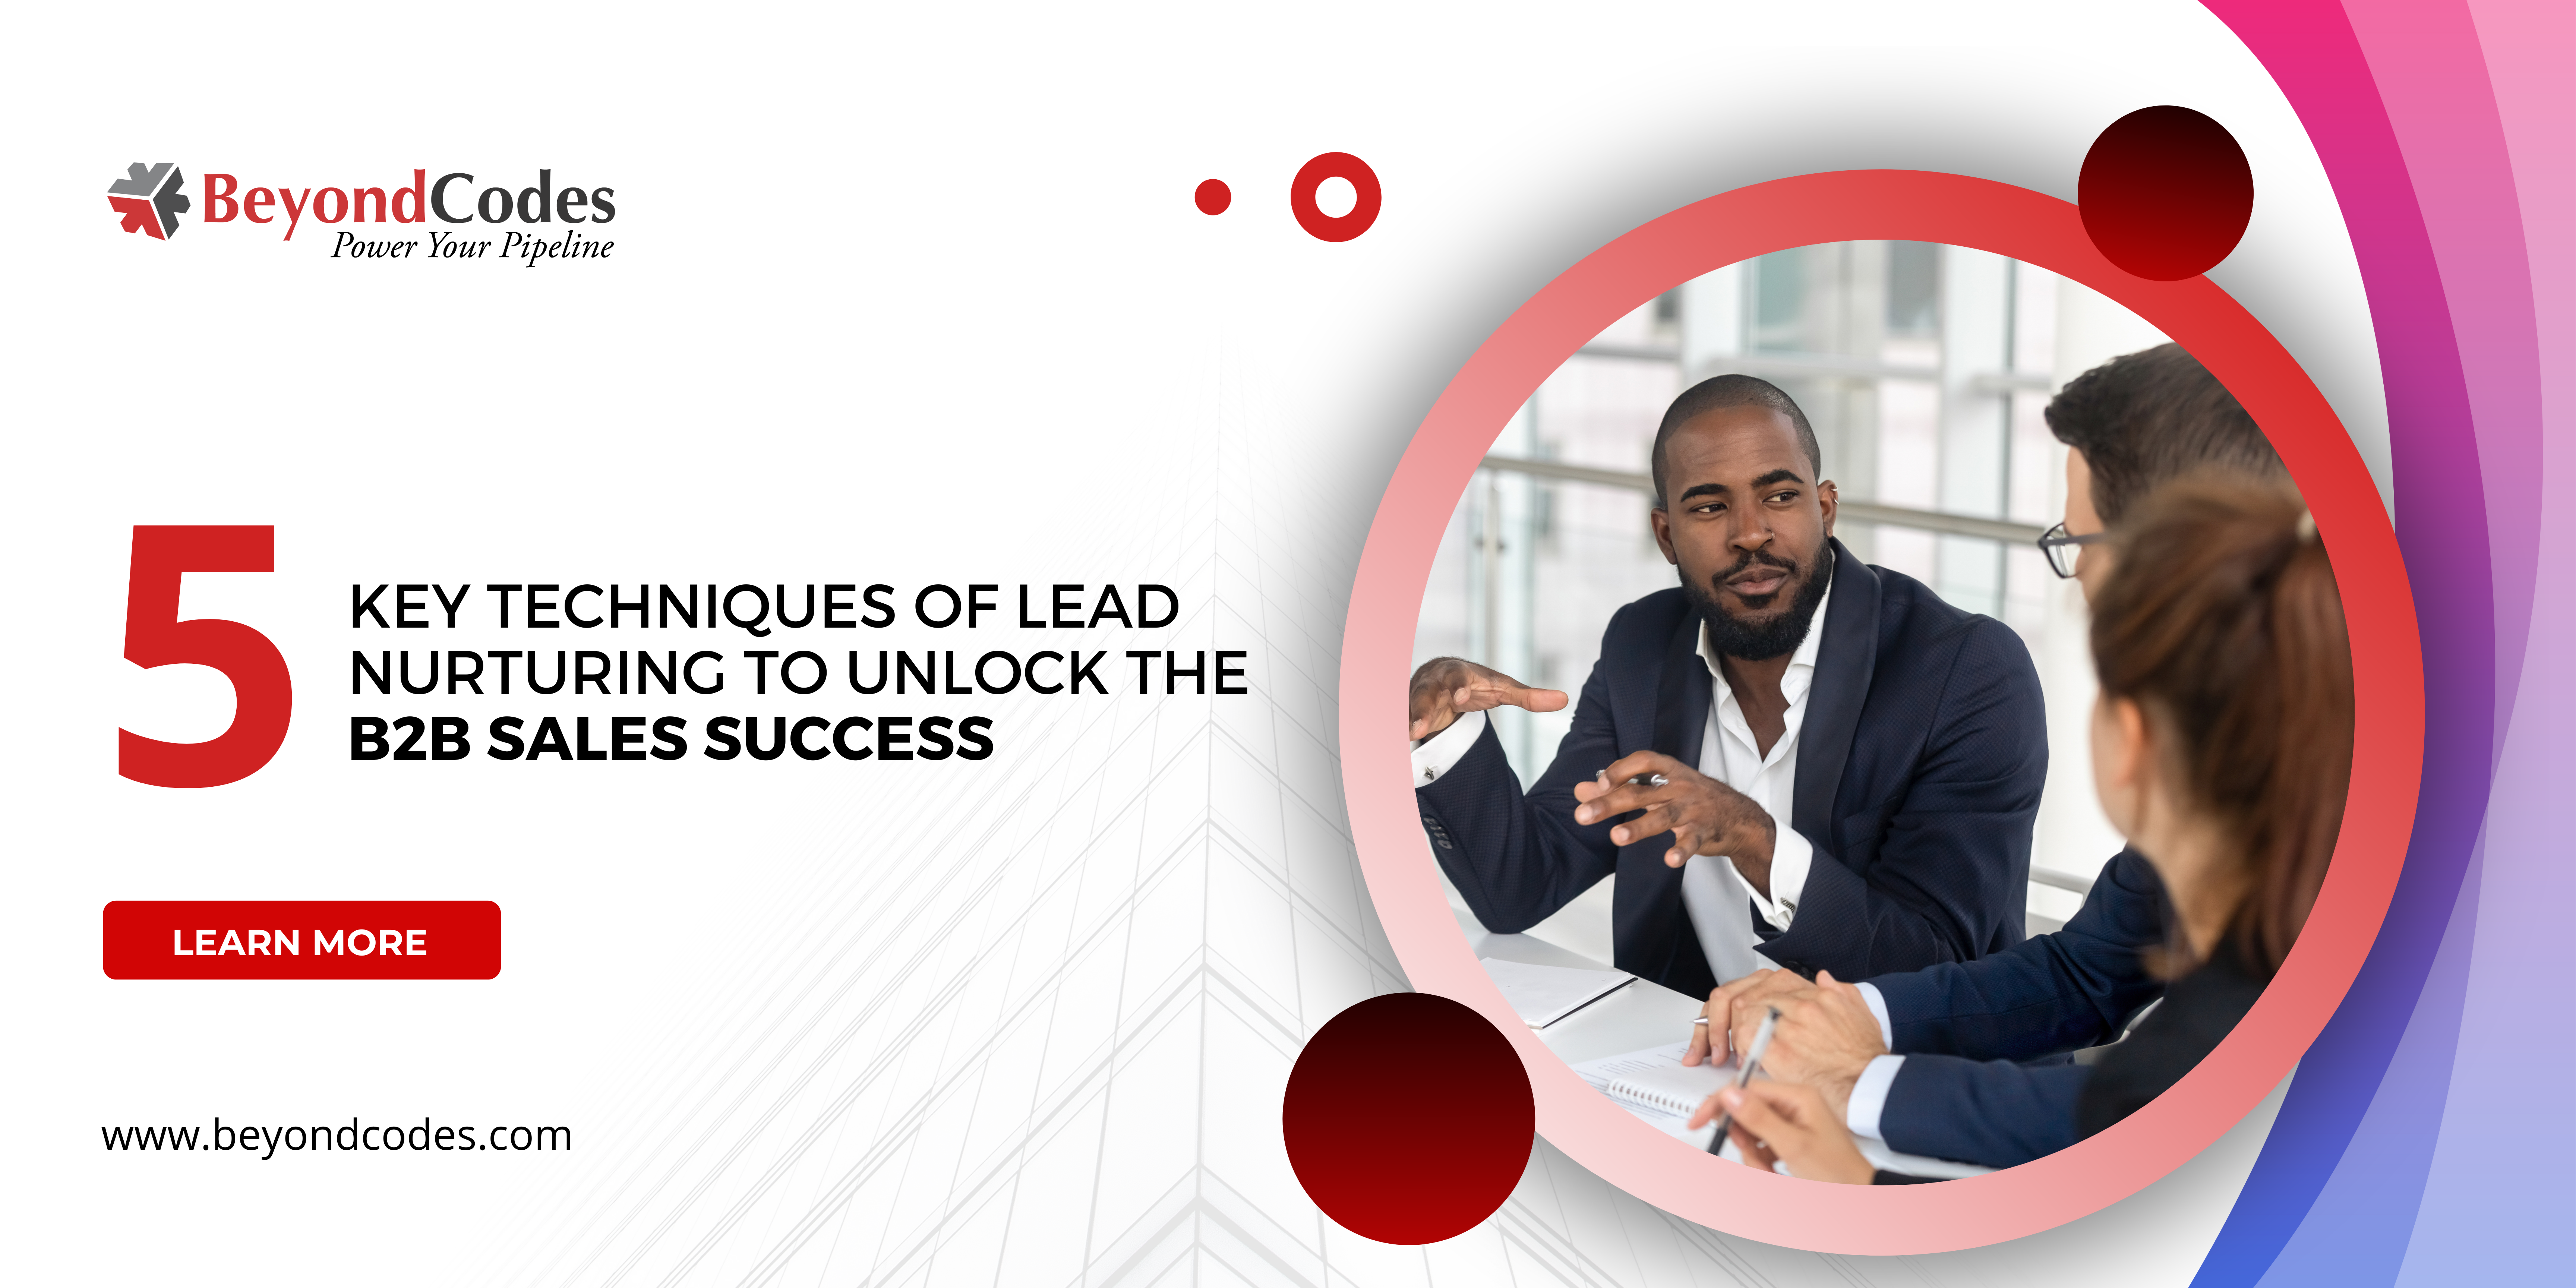 5 Techniques of Lead Nurturing to Unlock the B2B Sales Success - beyond Codes